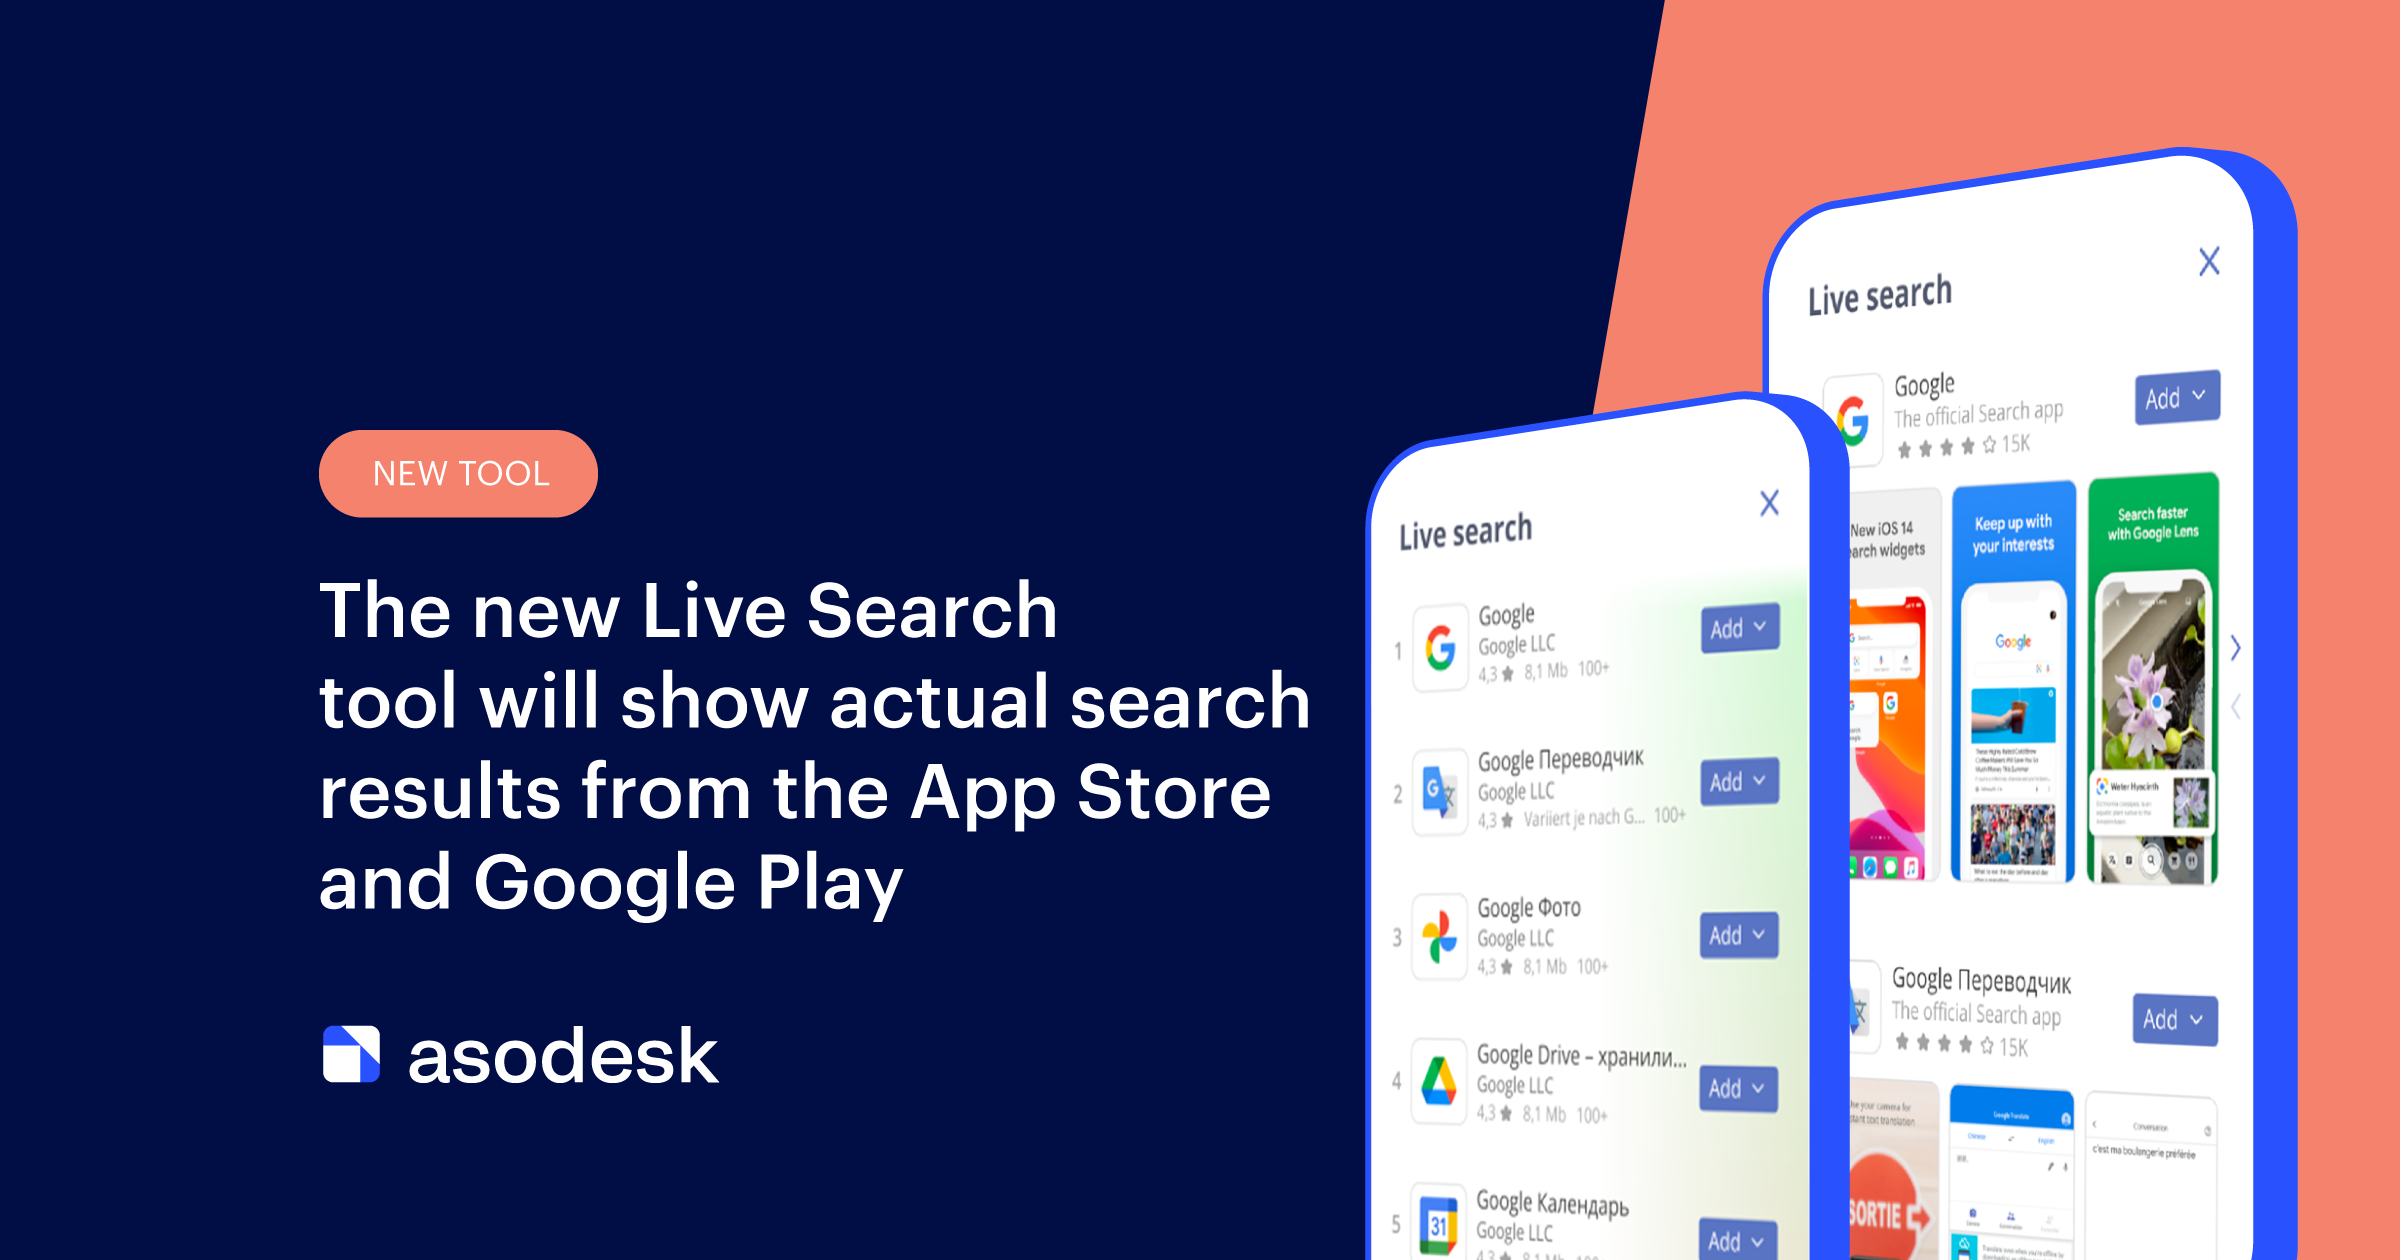 The new Live Search tool will show actual search results from the App Store and Google Play